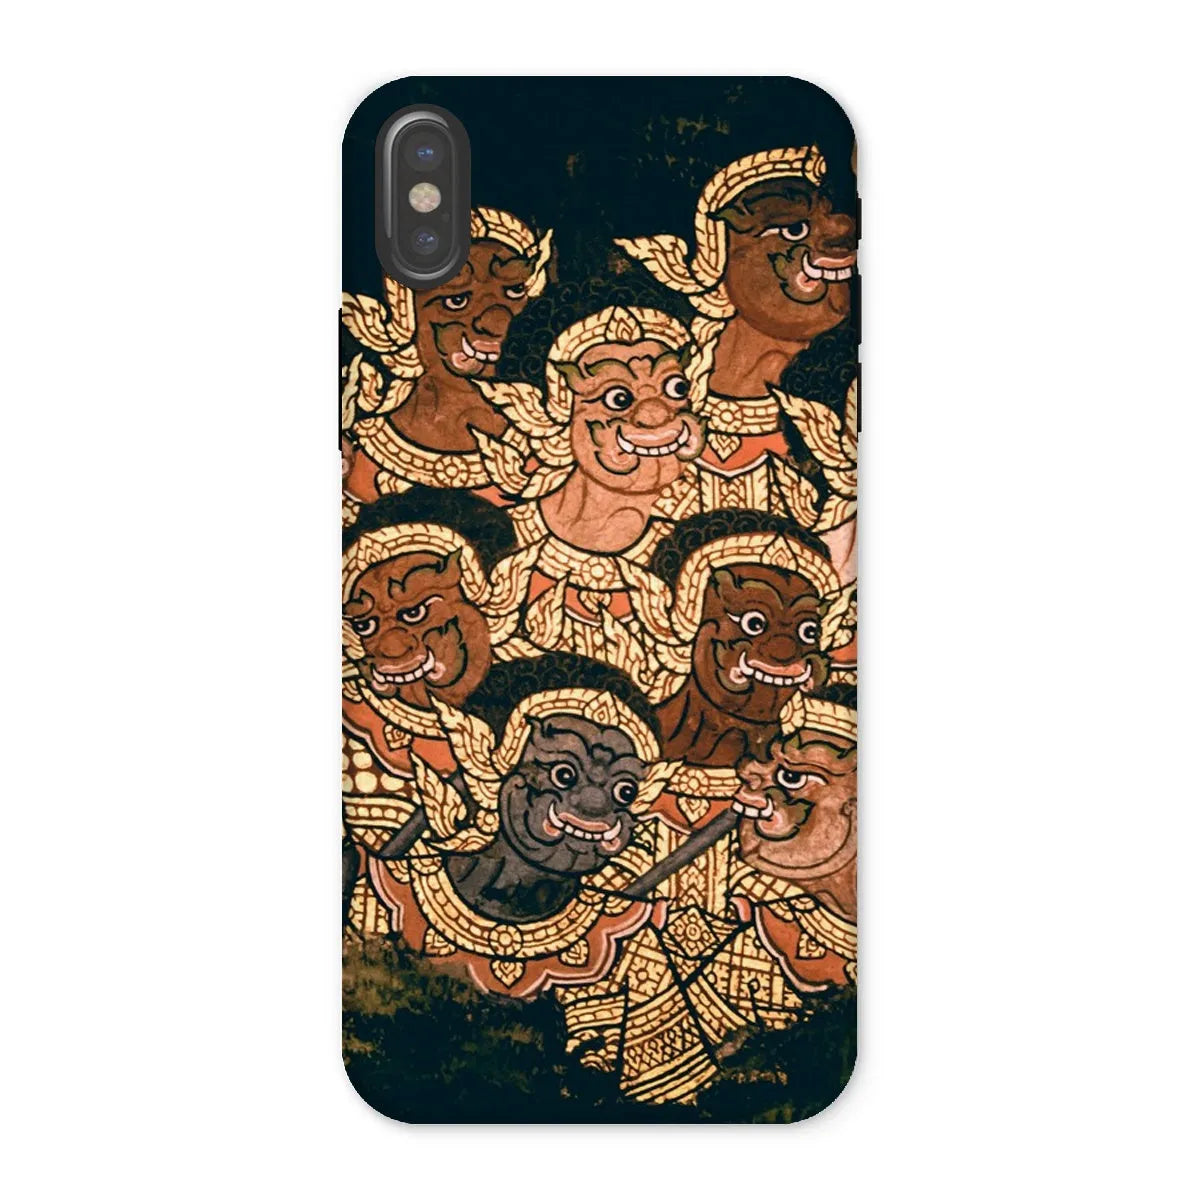 Babes In The Woods - Traditional Thai Myth Phone Case - Iphone x / Matte - Mobile Phone Cases - Aesthetic Art